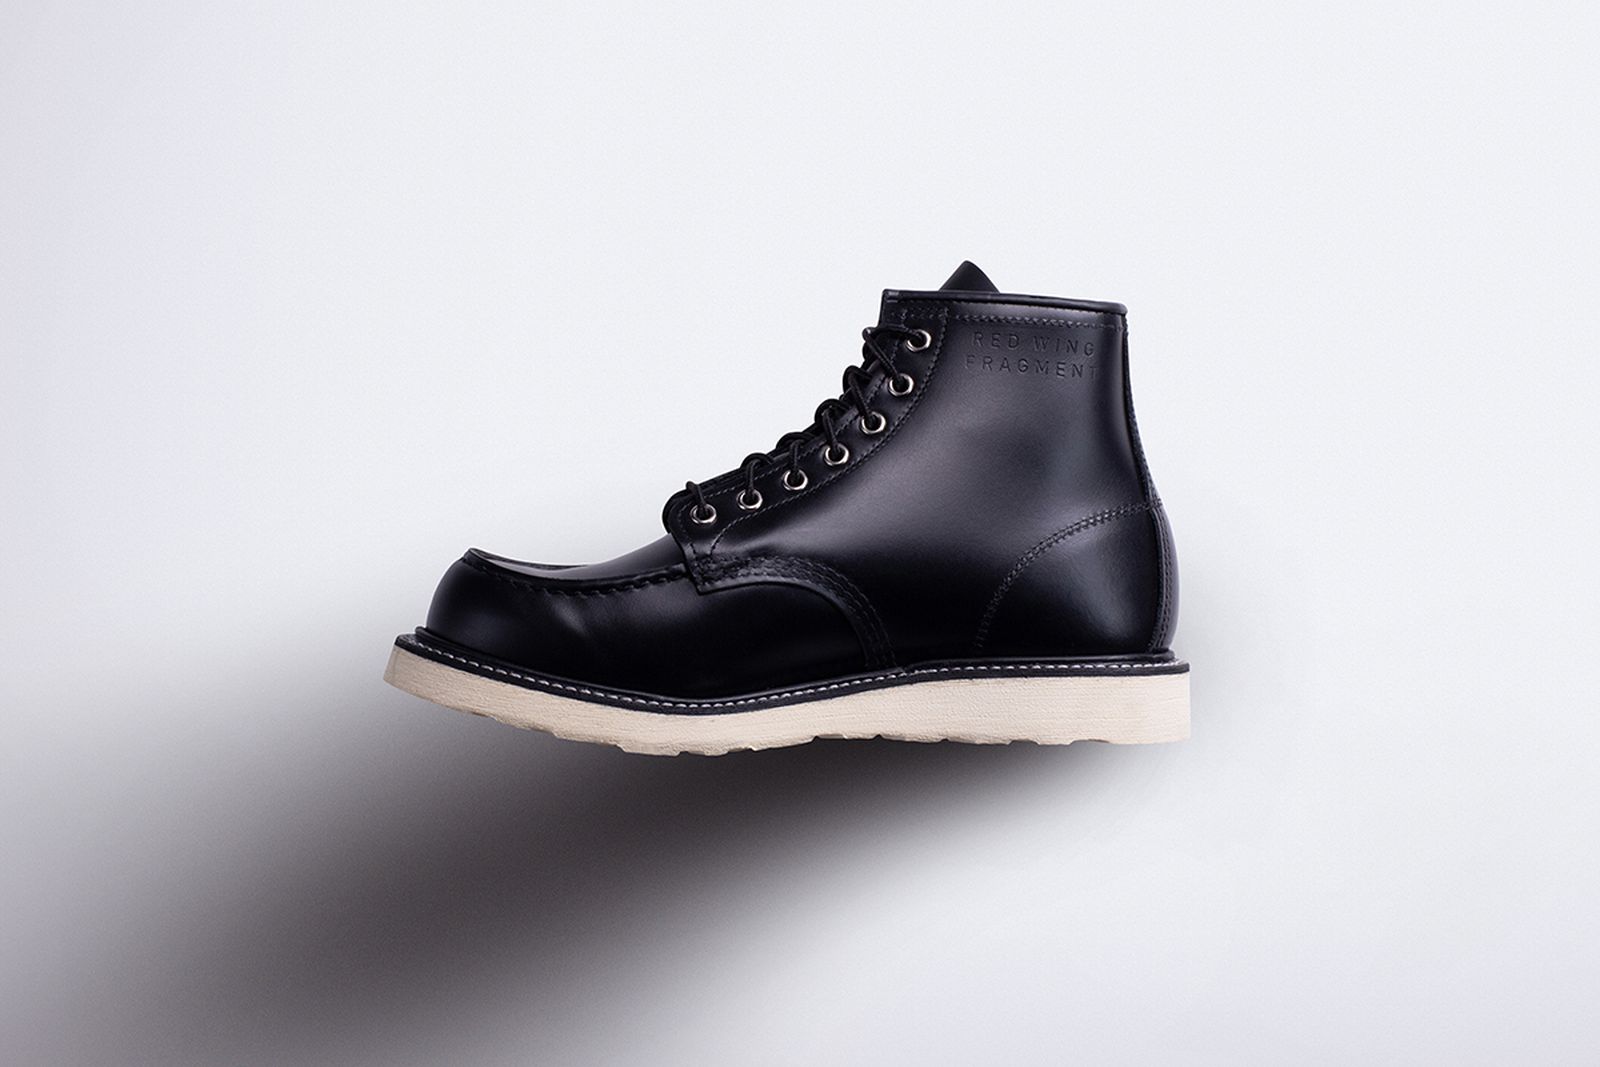 fragment design x Red Wing 4679 Moc Toe: Release Info